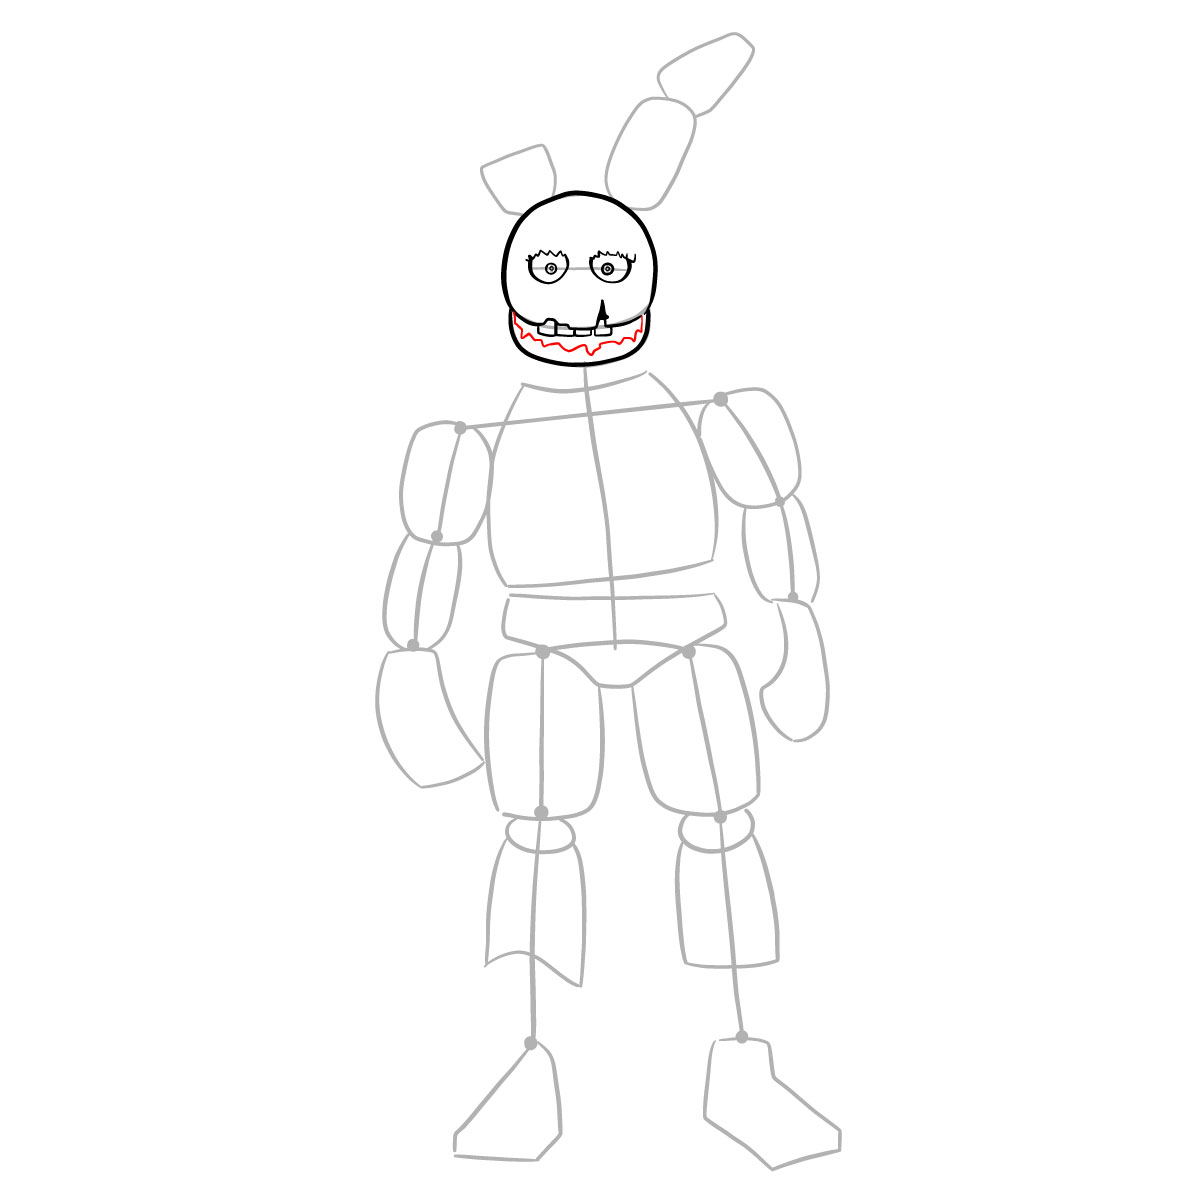 How to draw Springtrap from FNAF 3 - step 09